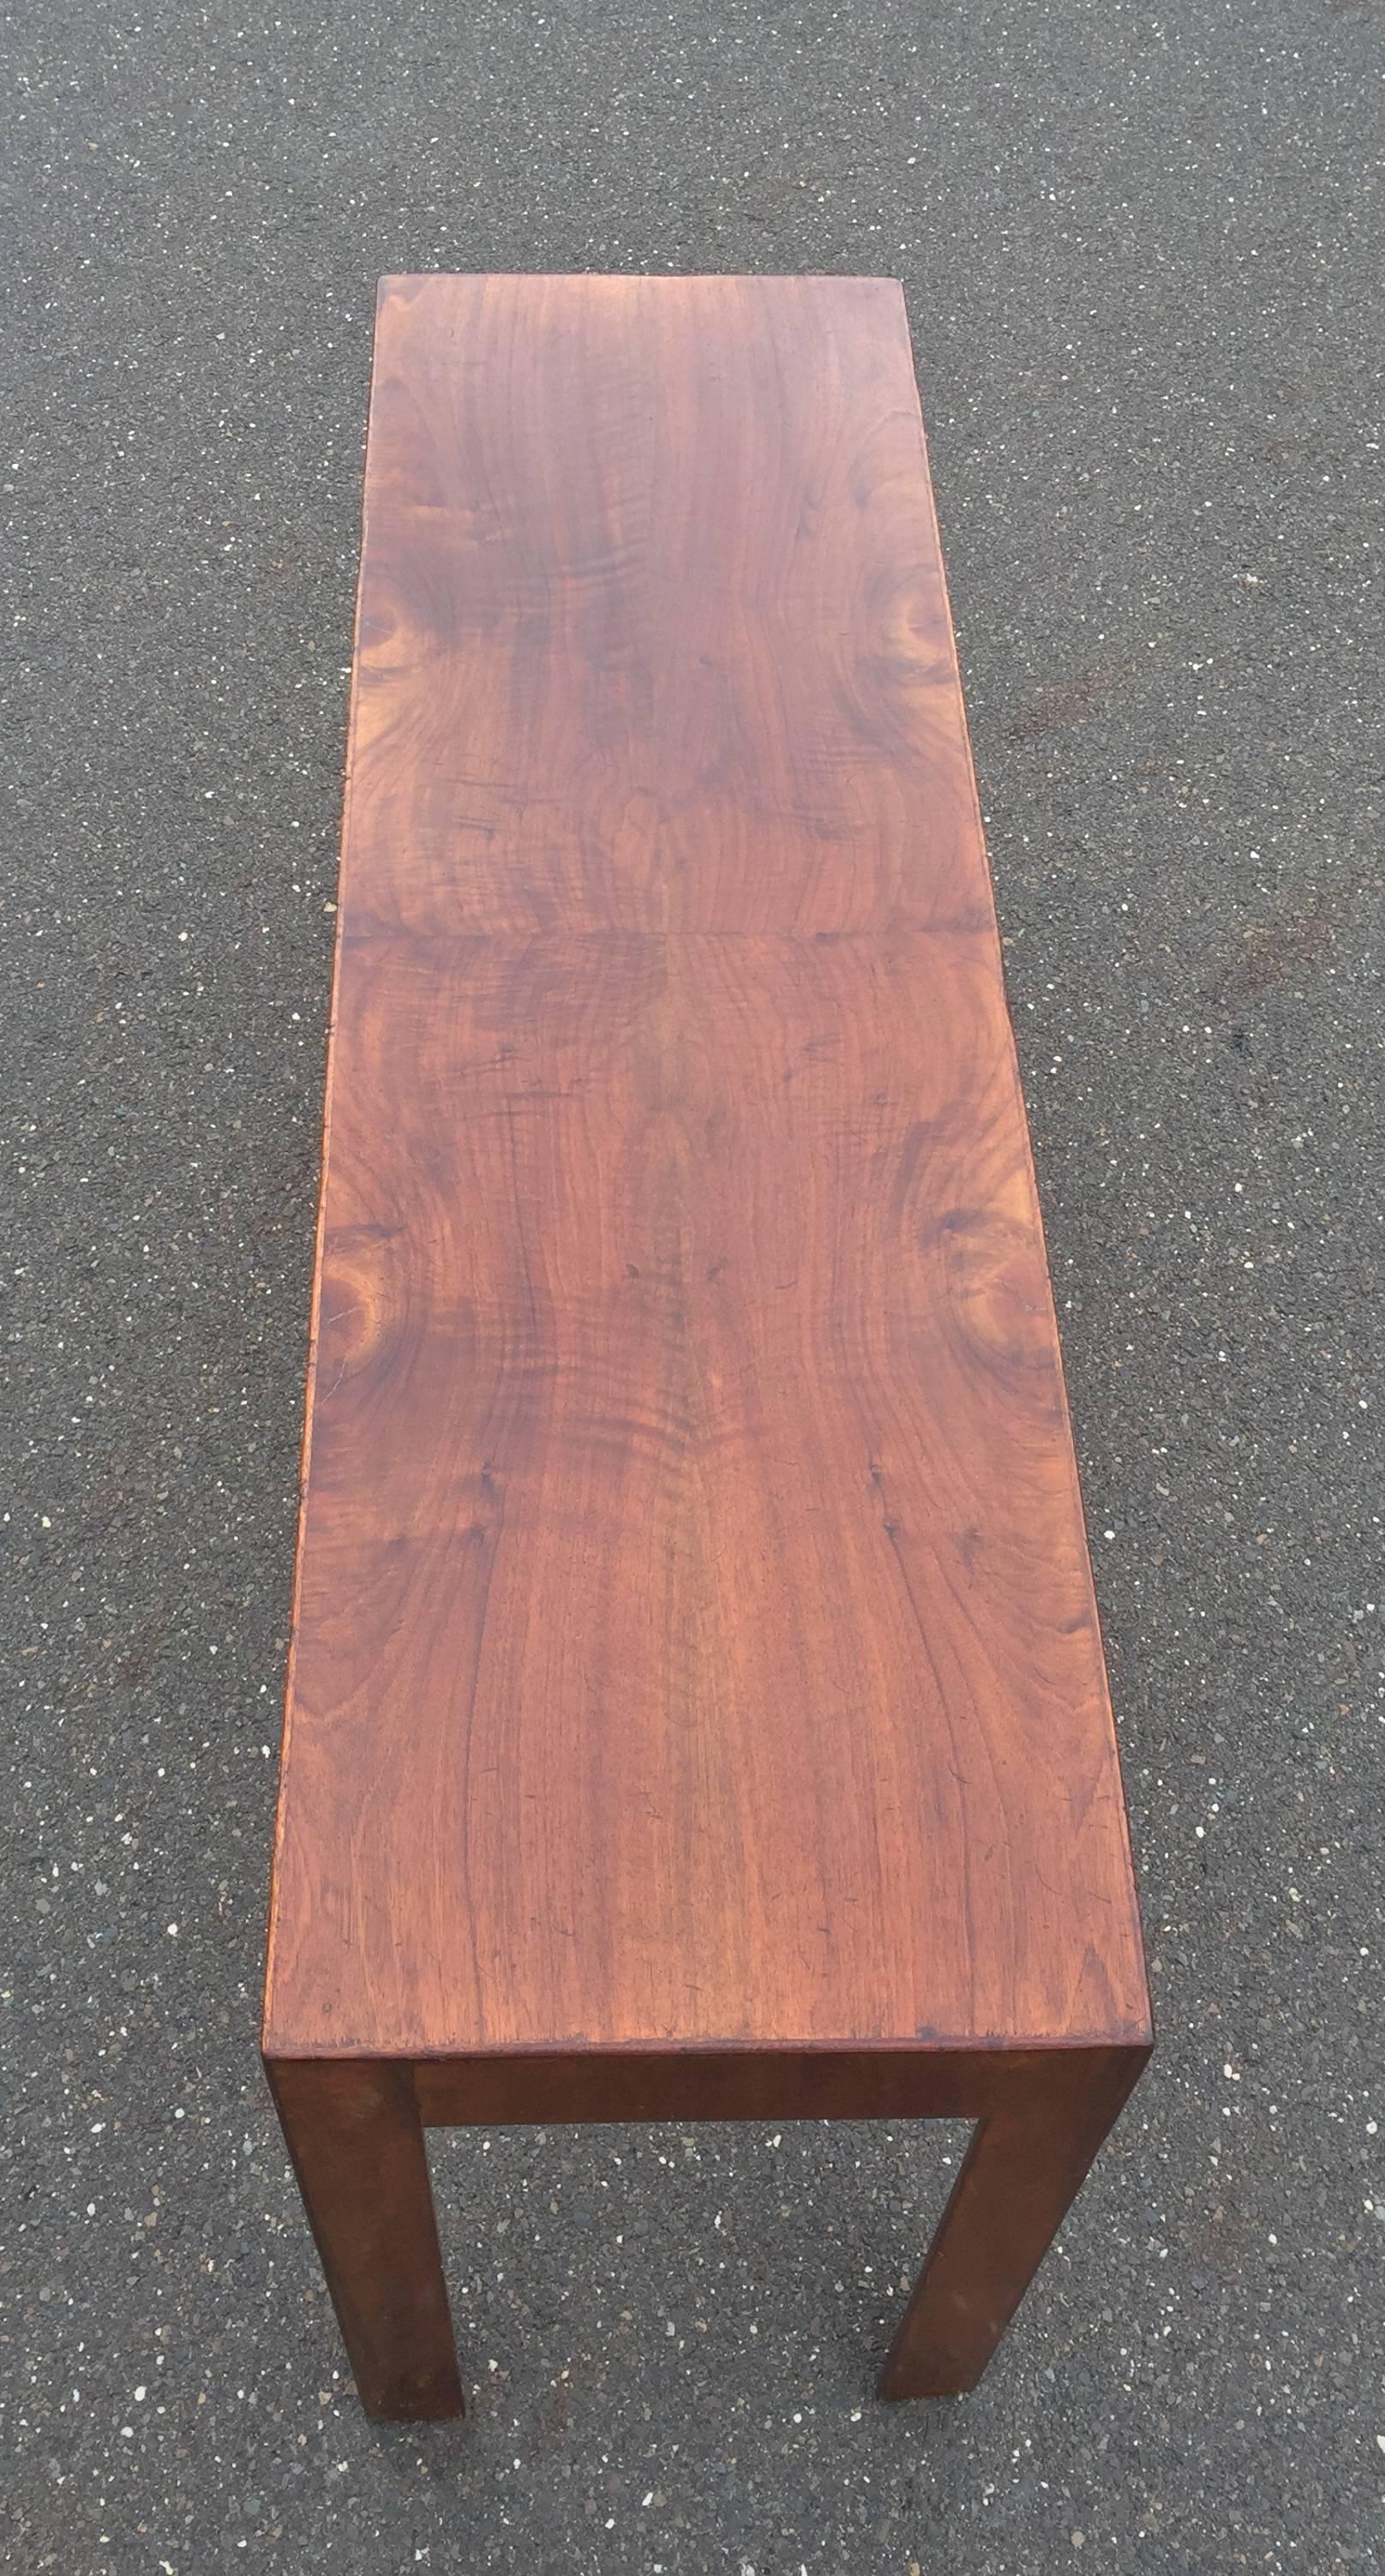 Clean lines, Mid-Century Modern silouette, bookmatched walnut top, has been intentionally distressed.

Made in Italy 
Skirt thickness 4 inches
Opening measures: H 24 inches x W 48 1/4.